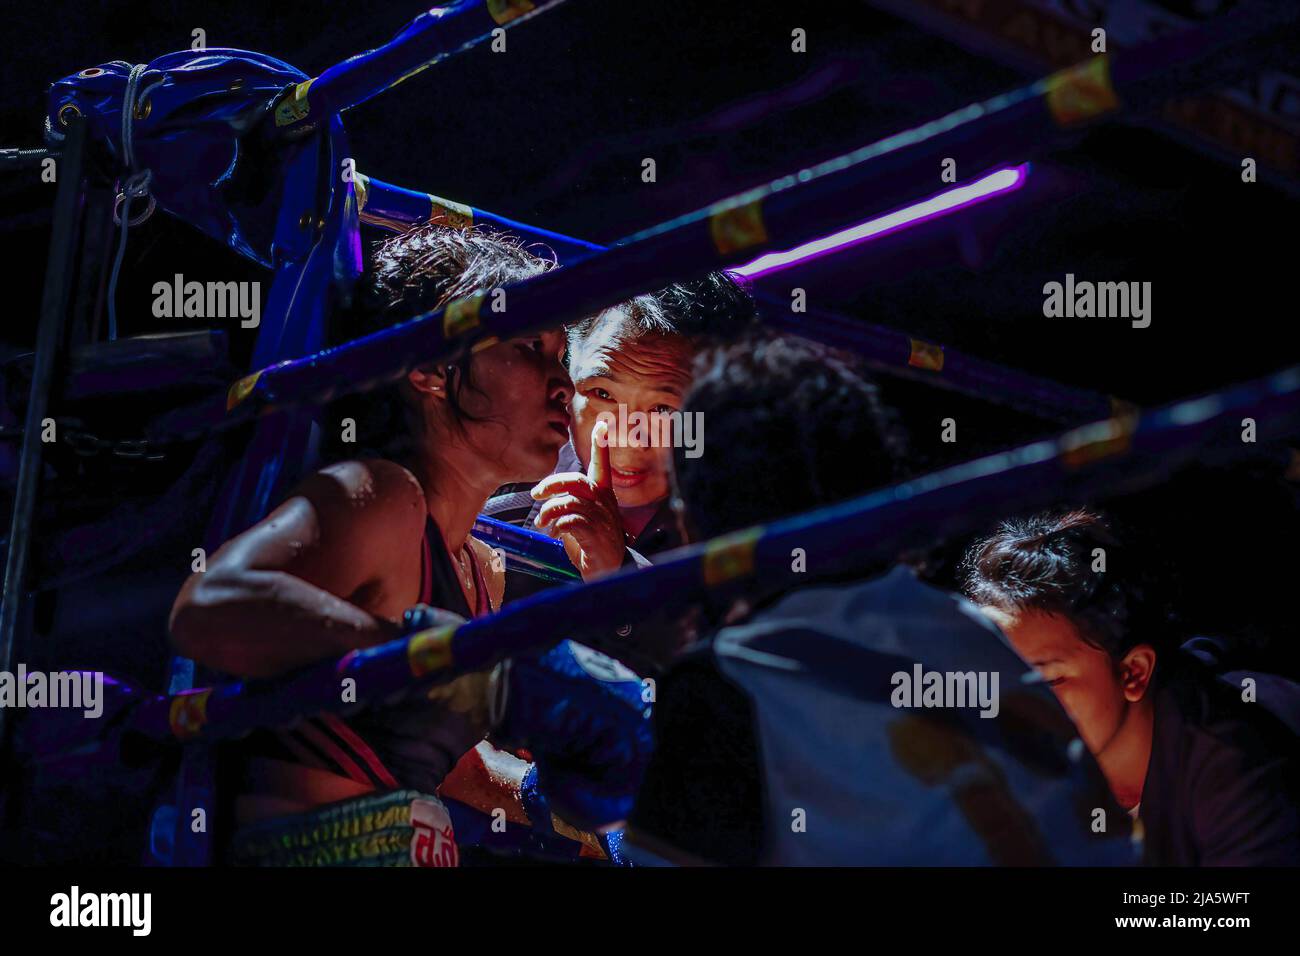 Nitida Leksanun receives indications from her coach during a fight at the Thaphae International Boxing stadium. Years ago seeing women in a ring fighting (Muay Thai) in Thailand was almost unheard of, unless it was in a ceremonial fight in the local temple during the festive season. Nowadays, things are changing and more women are joining the sport. The city of Chiang Mai is the epicentre of this change with the support of a local promoter that sees the sport as a way to promote equality, and the growing interest in the sport by foreigners flocking into the city. In some Muay Thai gyms, women Stock Photo